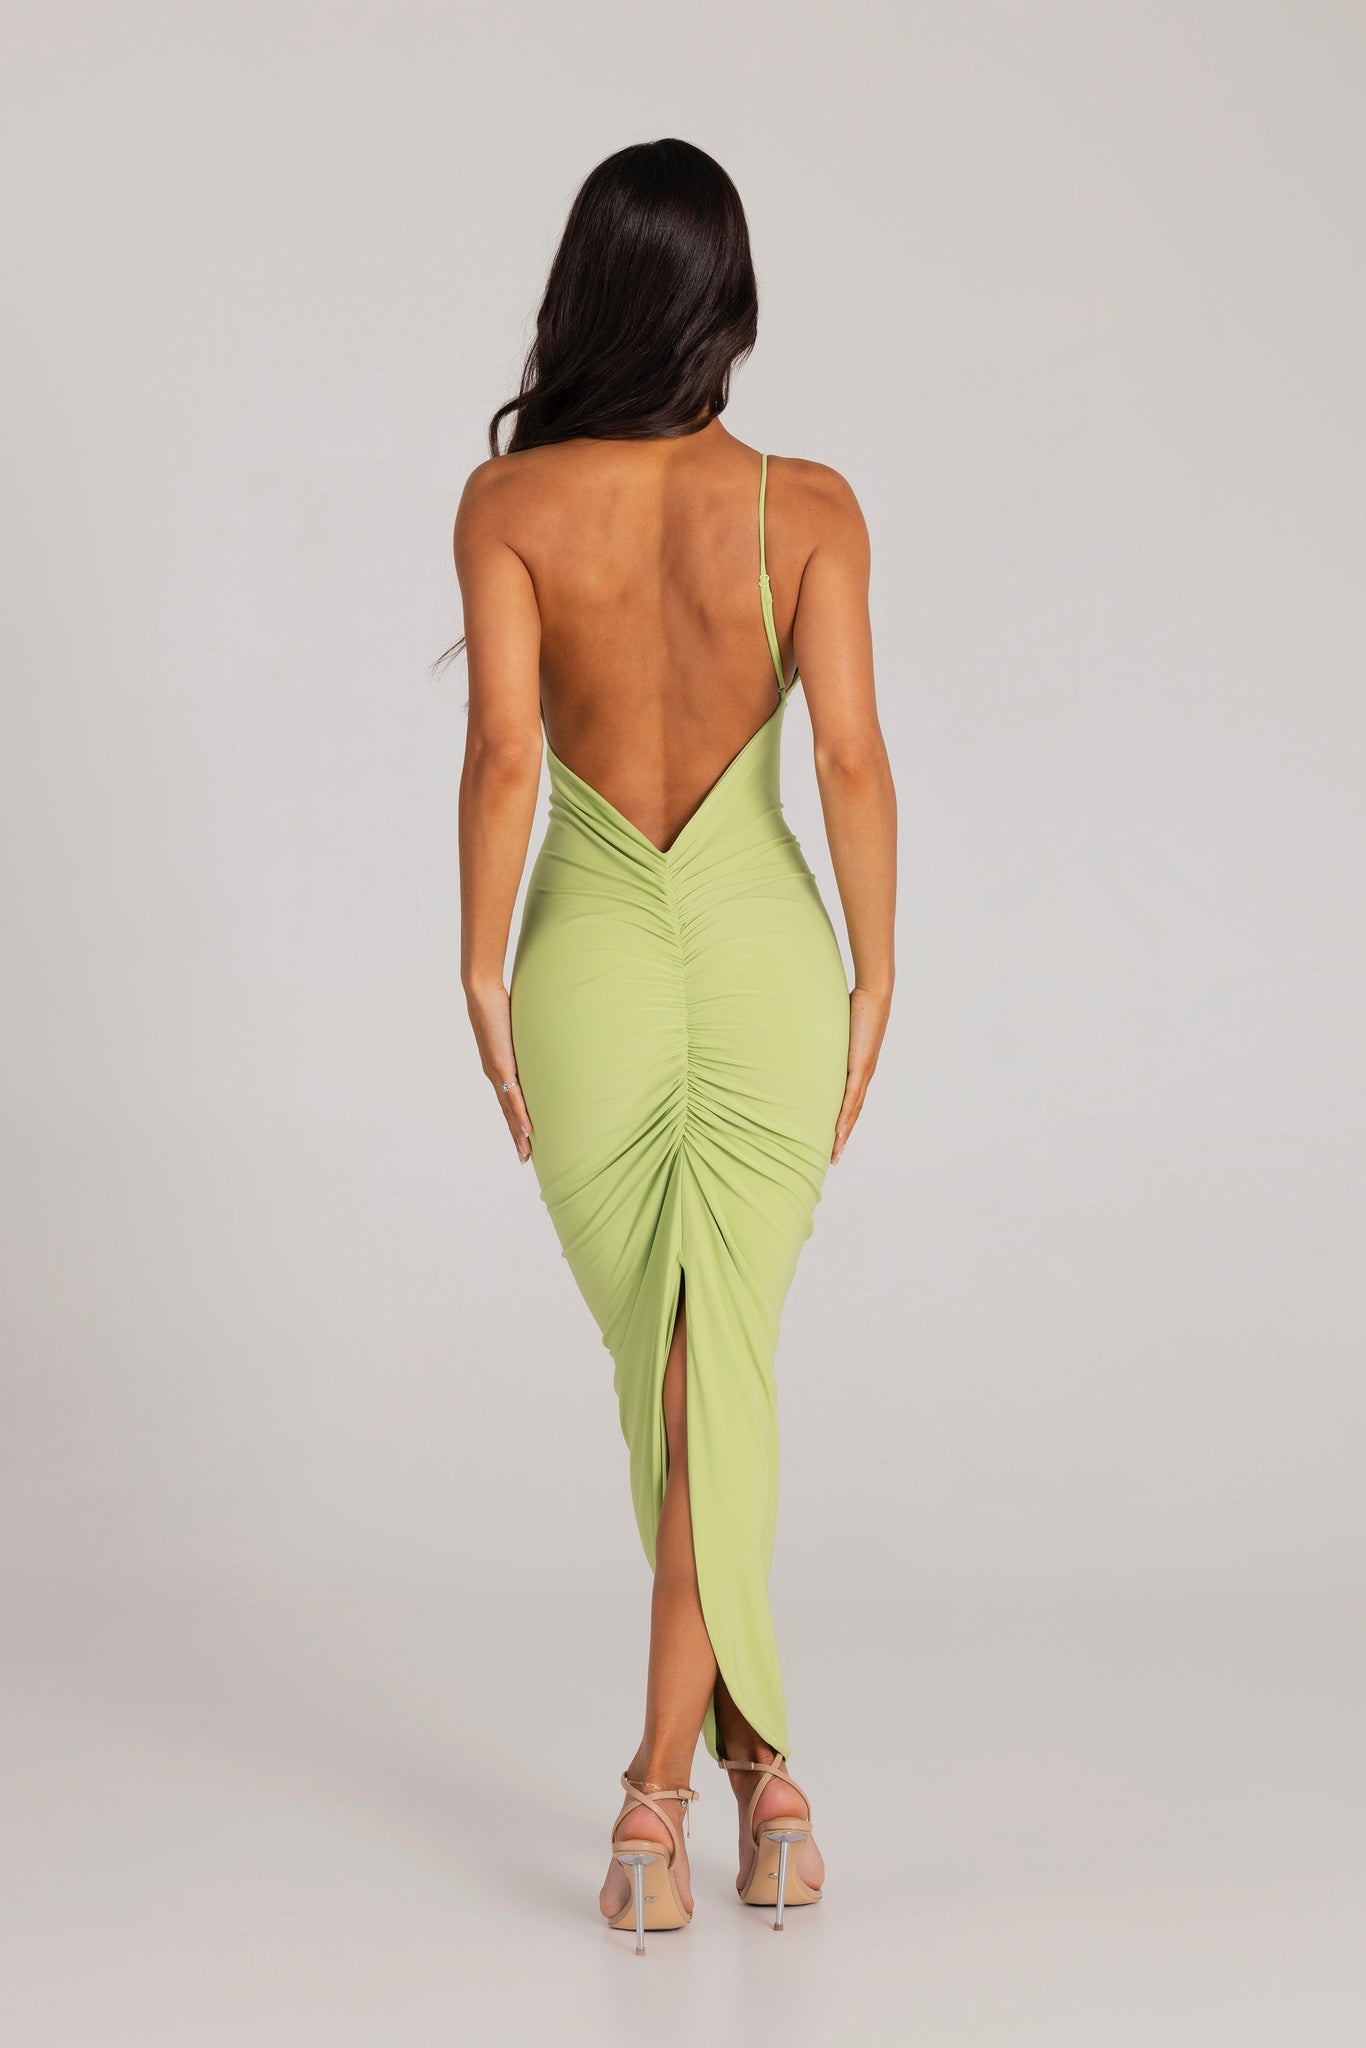 MÉLANI The Label LYDIA Lime Green One Shoulder Open Back Dress